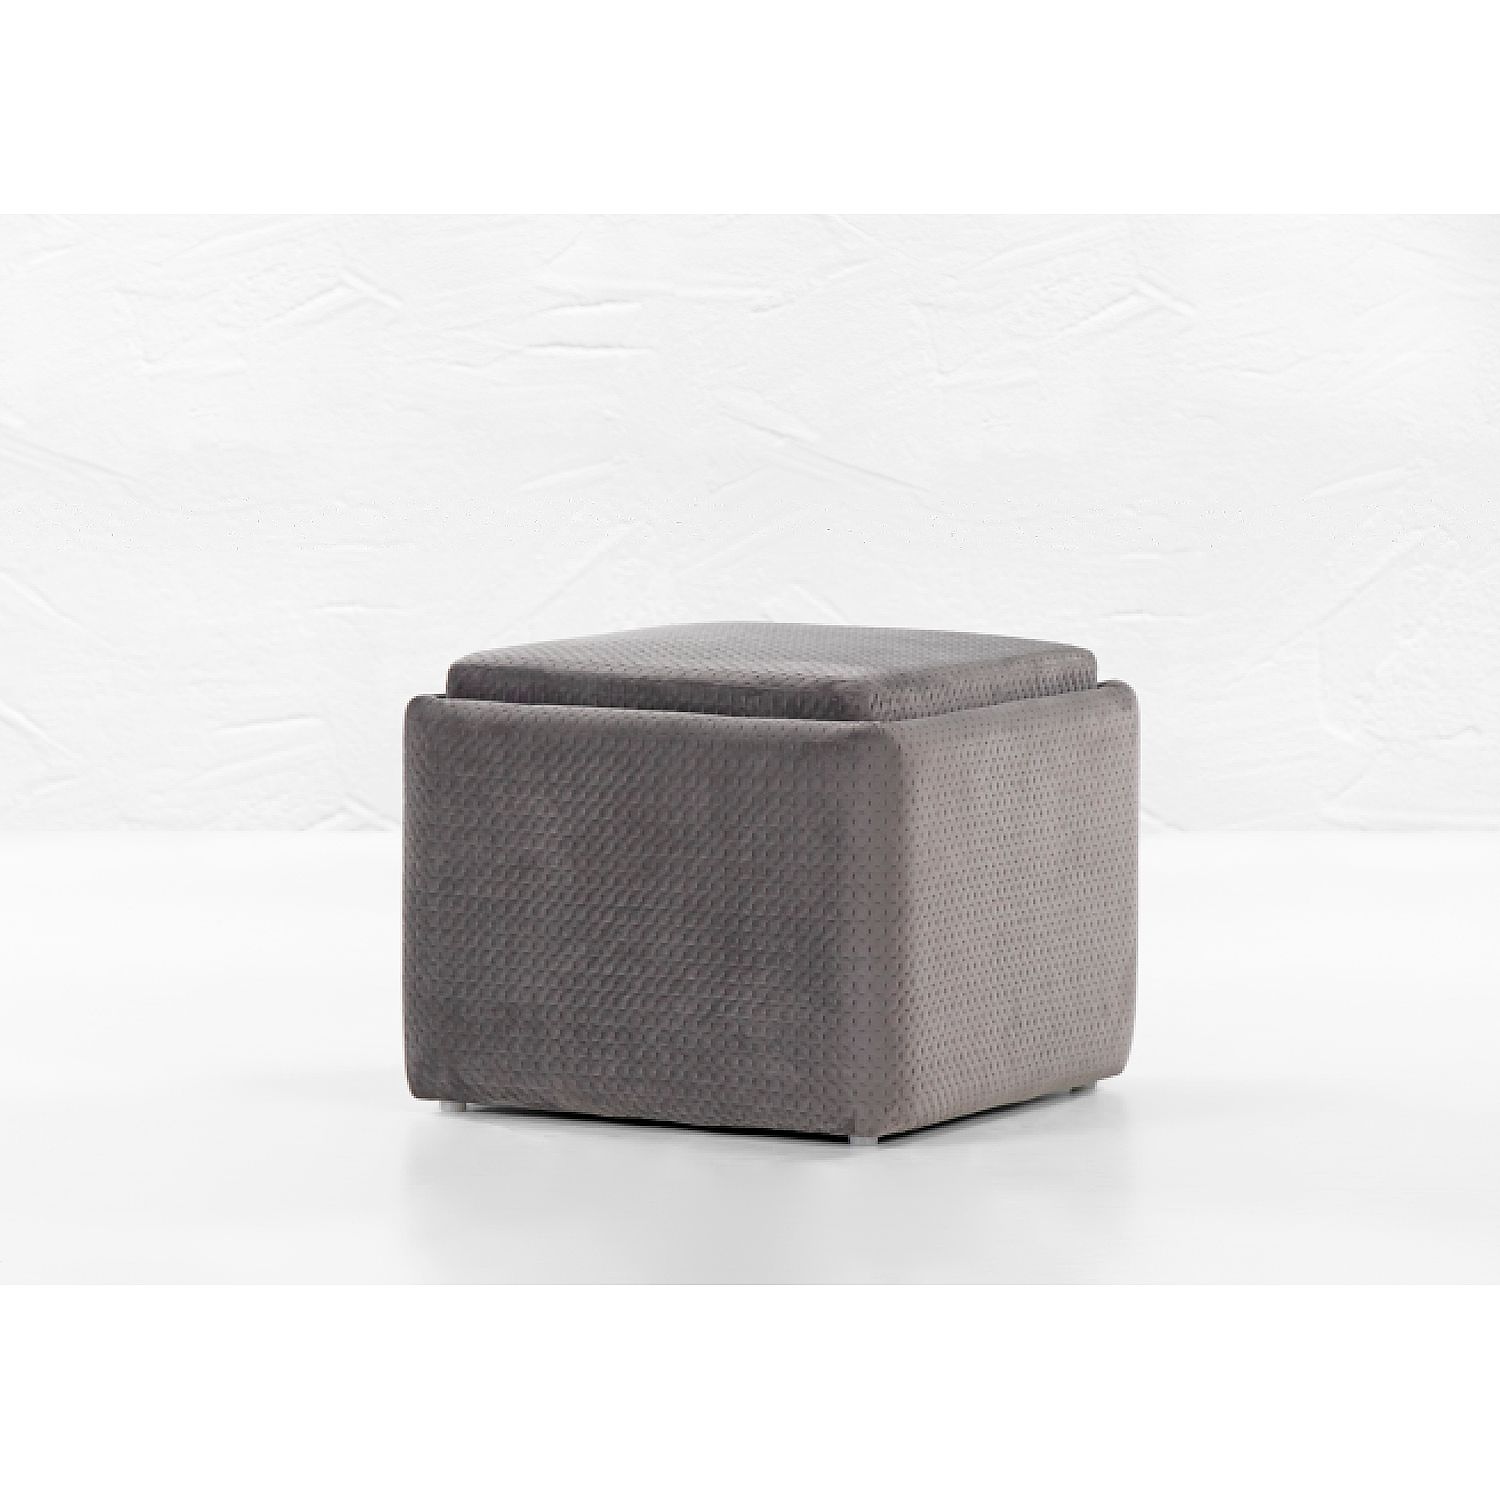 Buy Togo ottoman Online at Furnmill